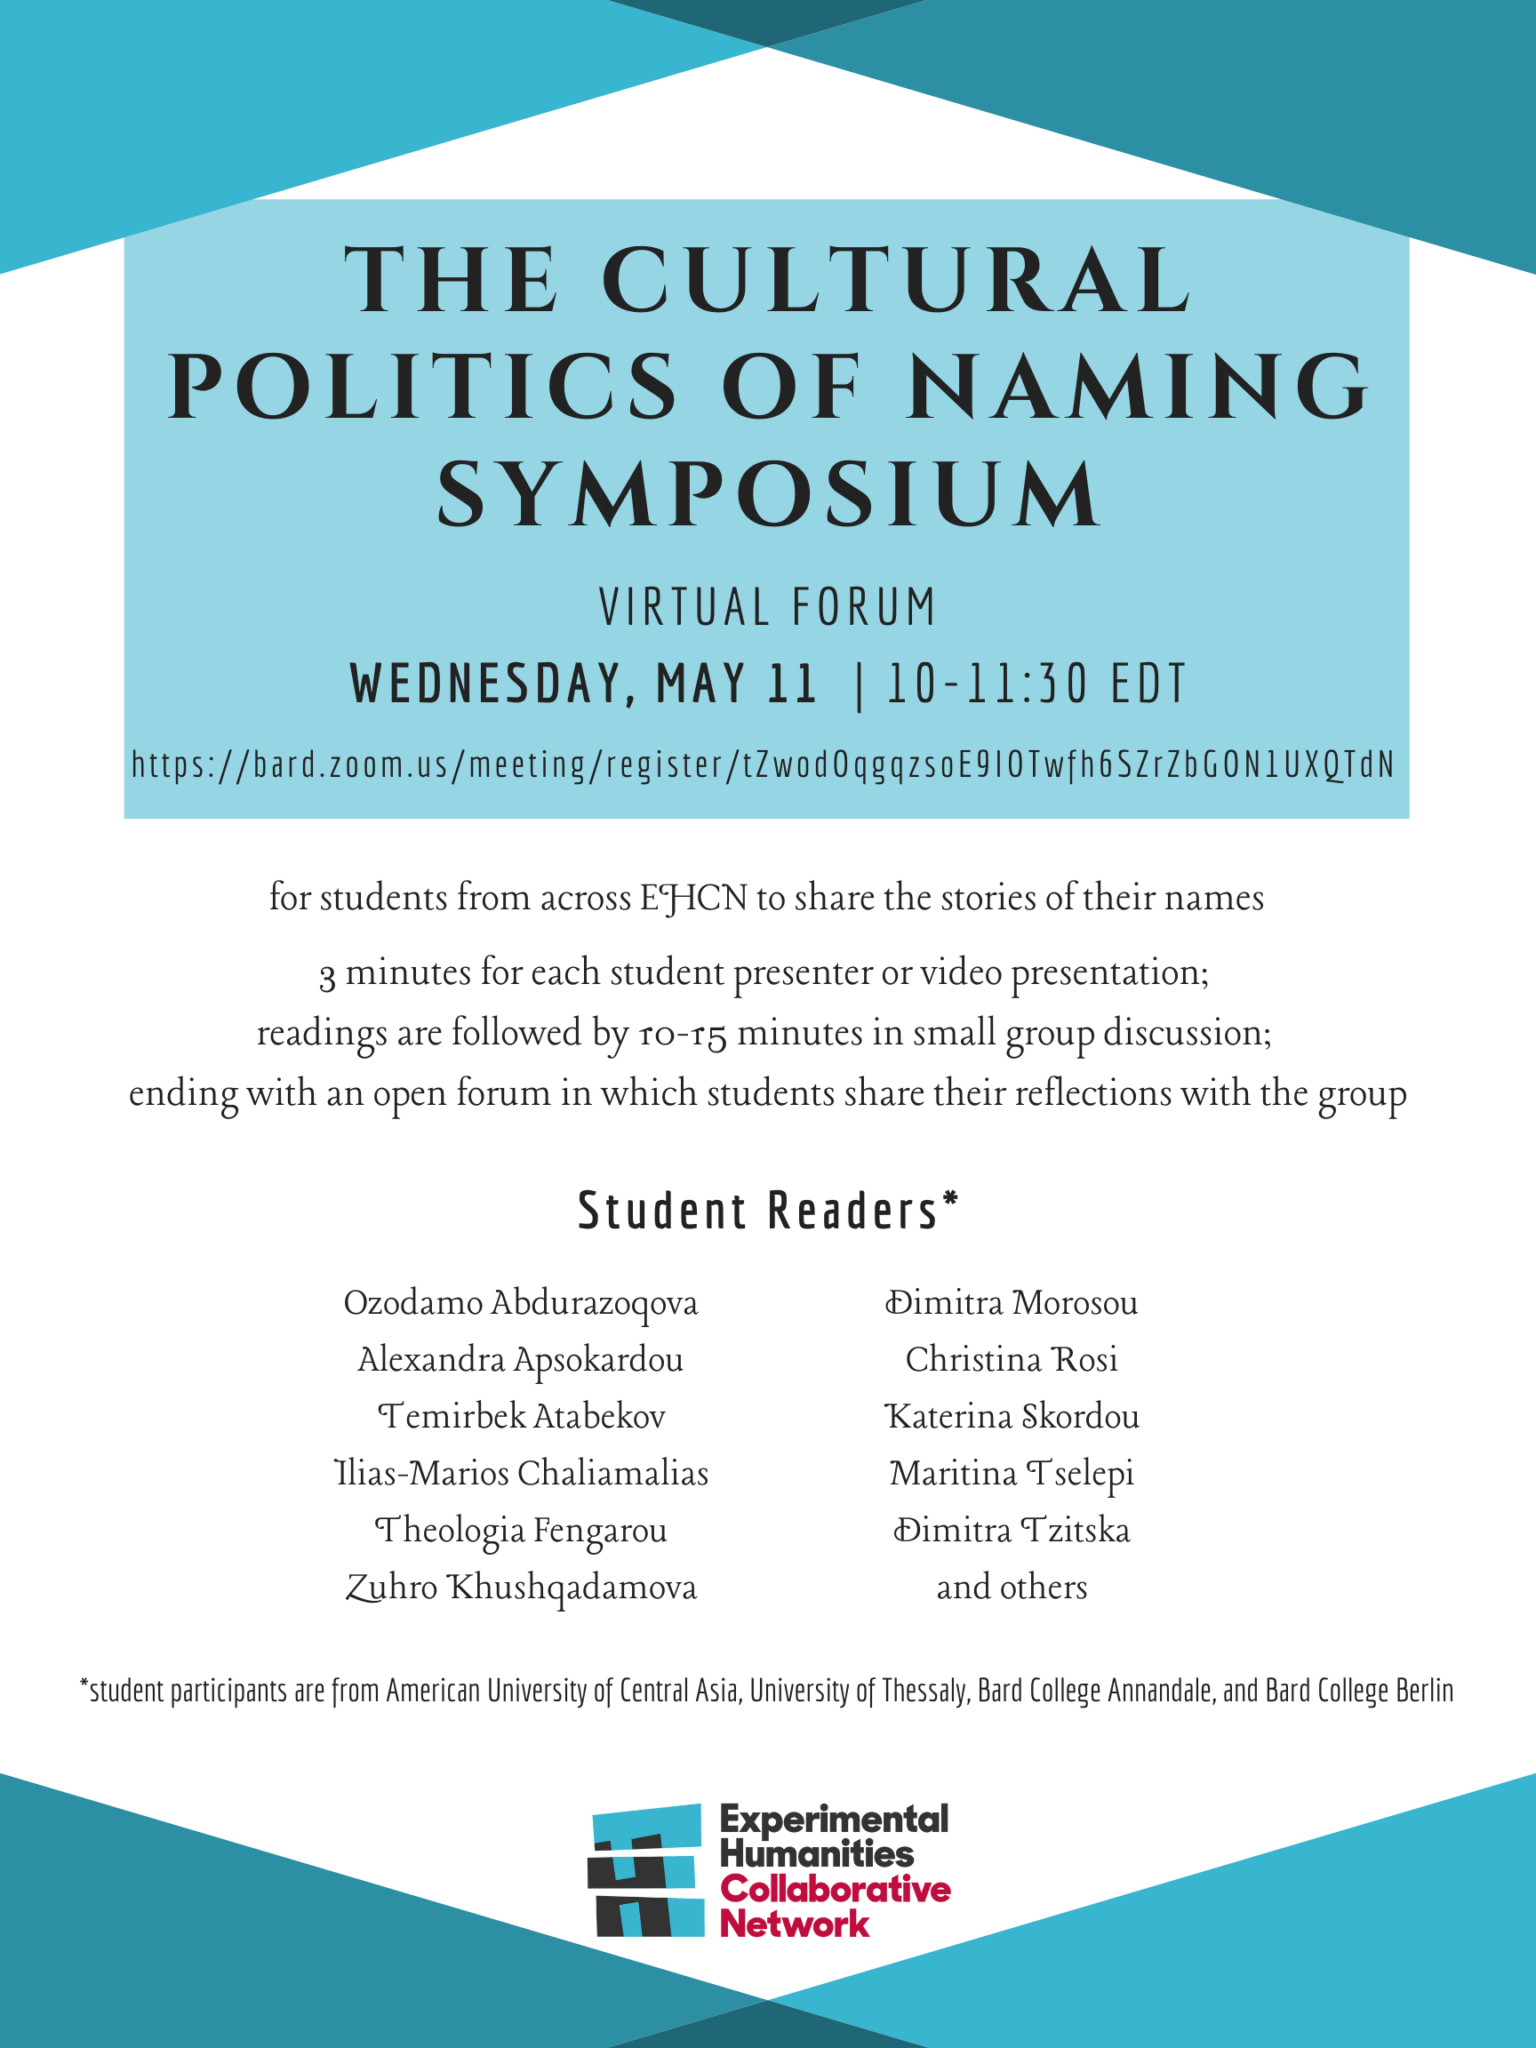 Poster for the Wednesday Virtual Forum of the Cultural Politics of Naming Symposium